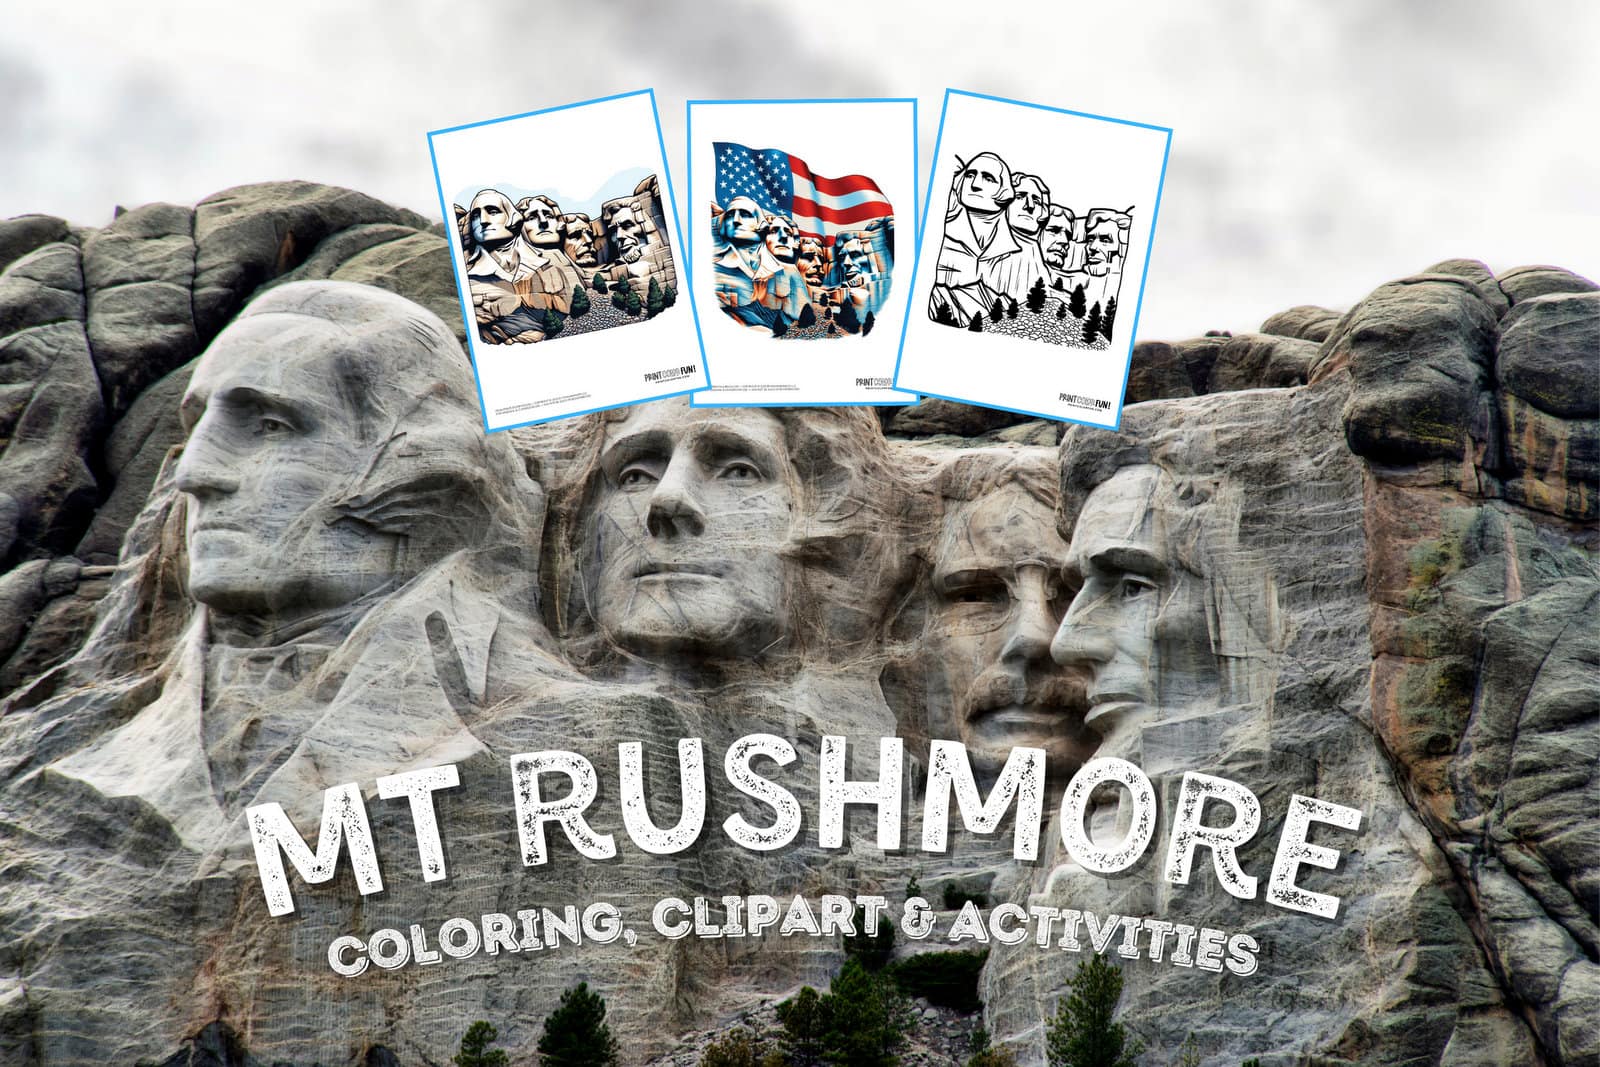 Mount Rushmore coloring page clipart activities from PrintColorFun com